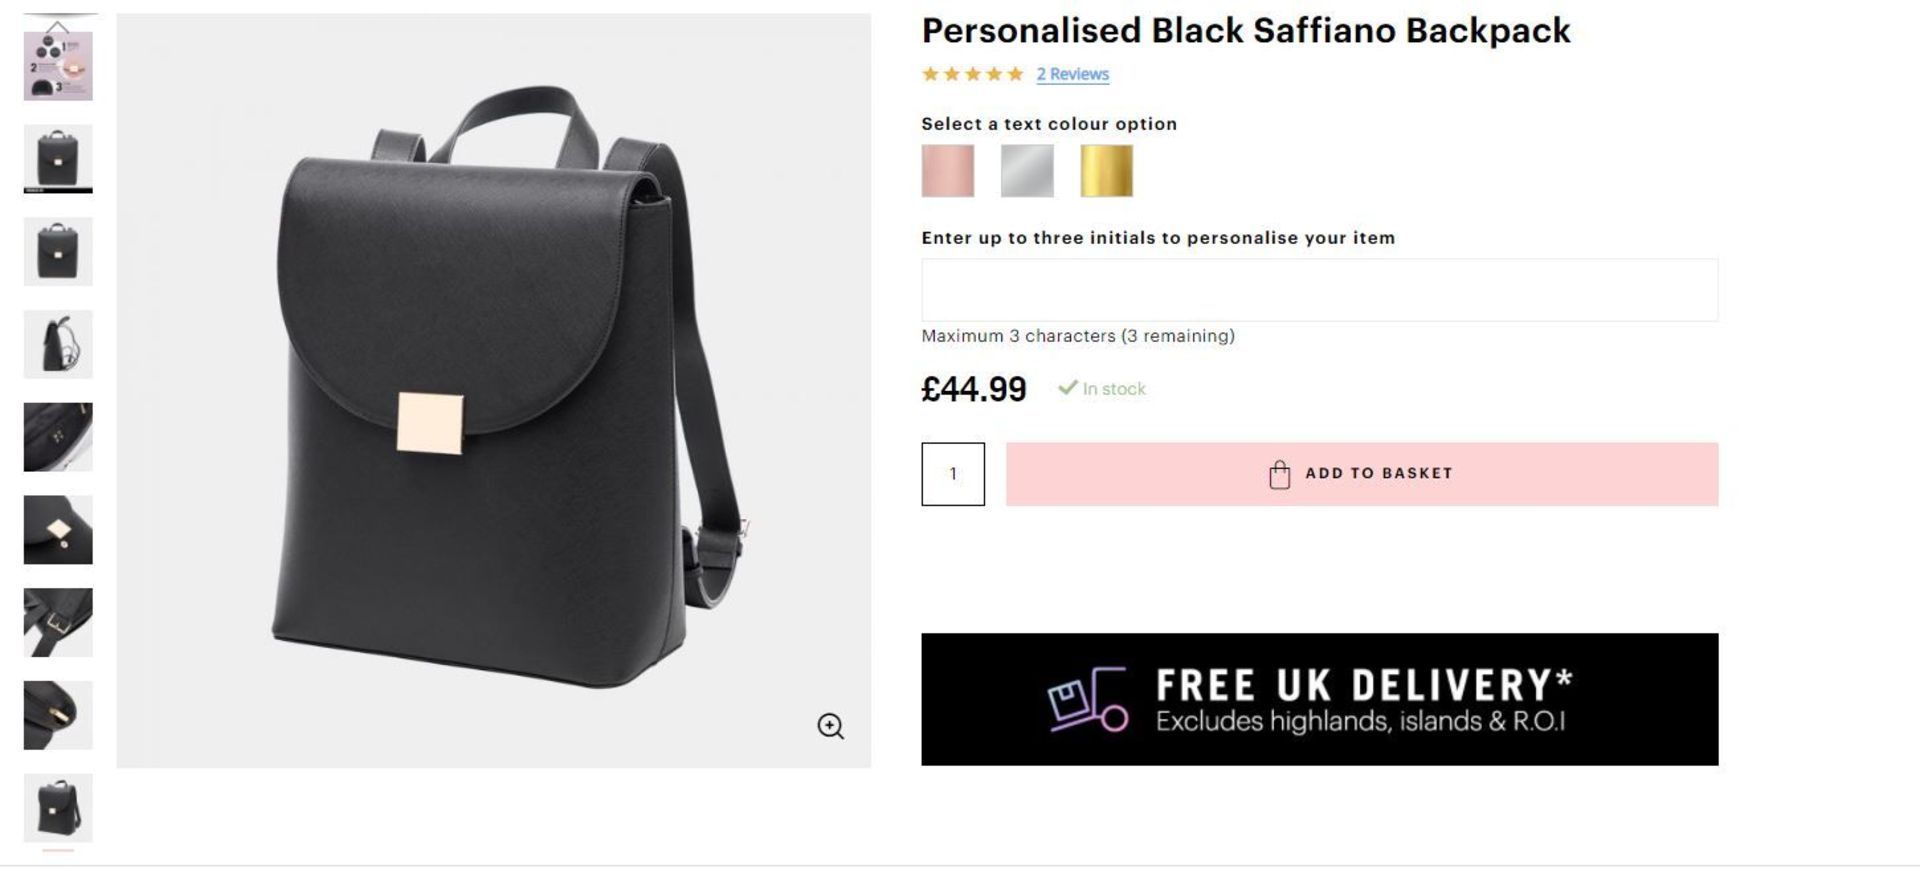 4 x NEW PACKAGED Beauti Saffiano Backpack - Black. RRP £49.99 each. Note: Item is not personalised. - Image 3 of 3